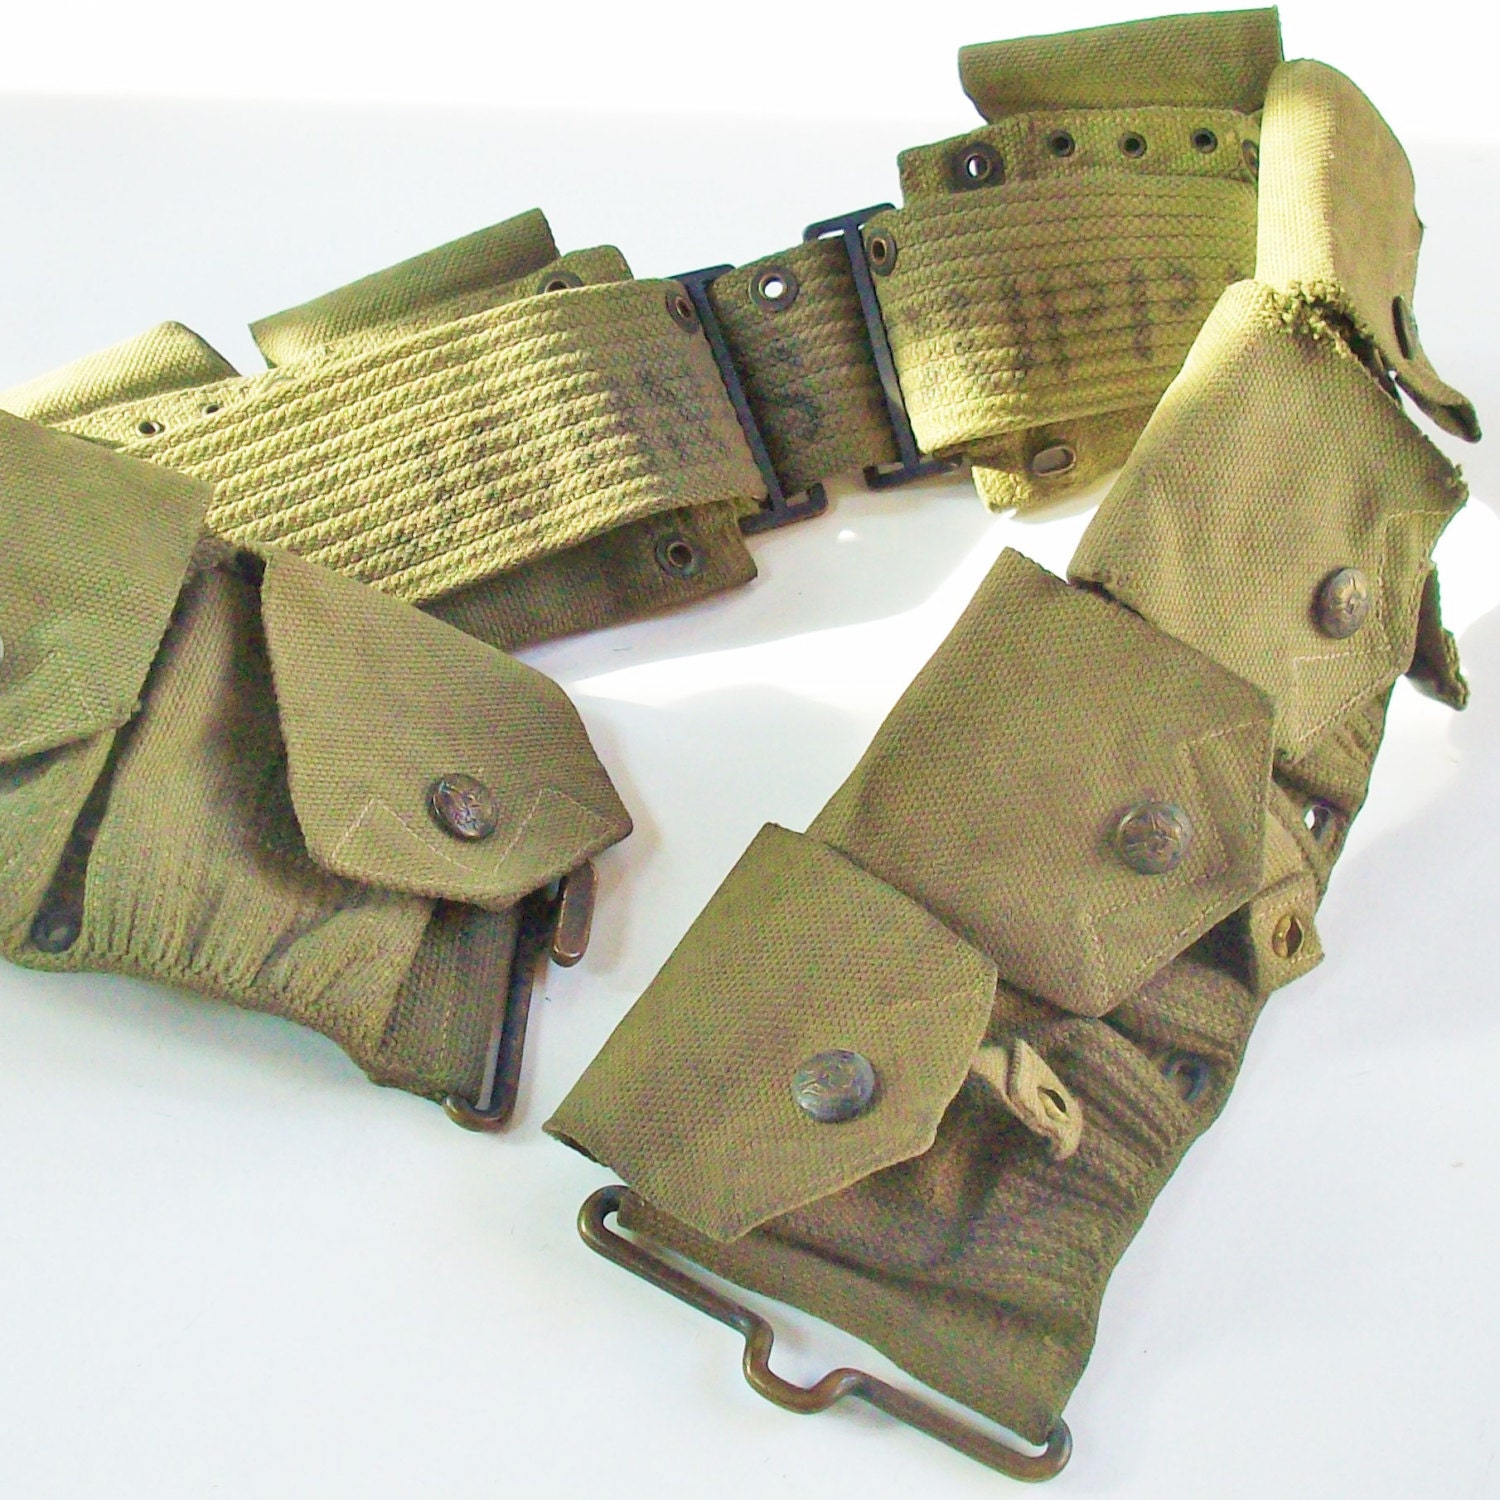 Military waxed canvas Belt / 10 Pouches Design / Fully